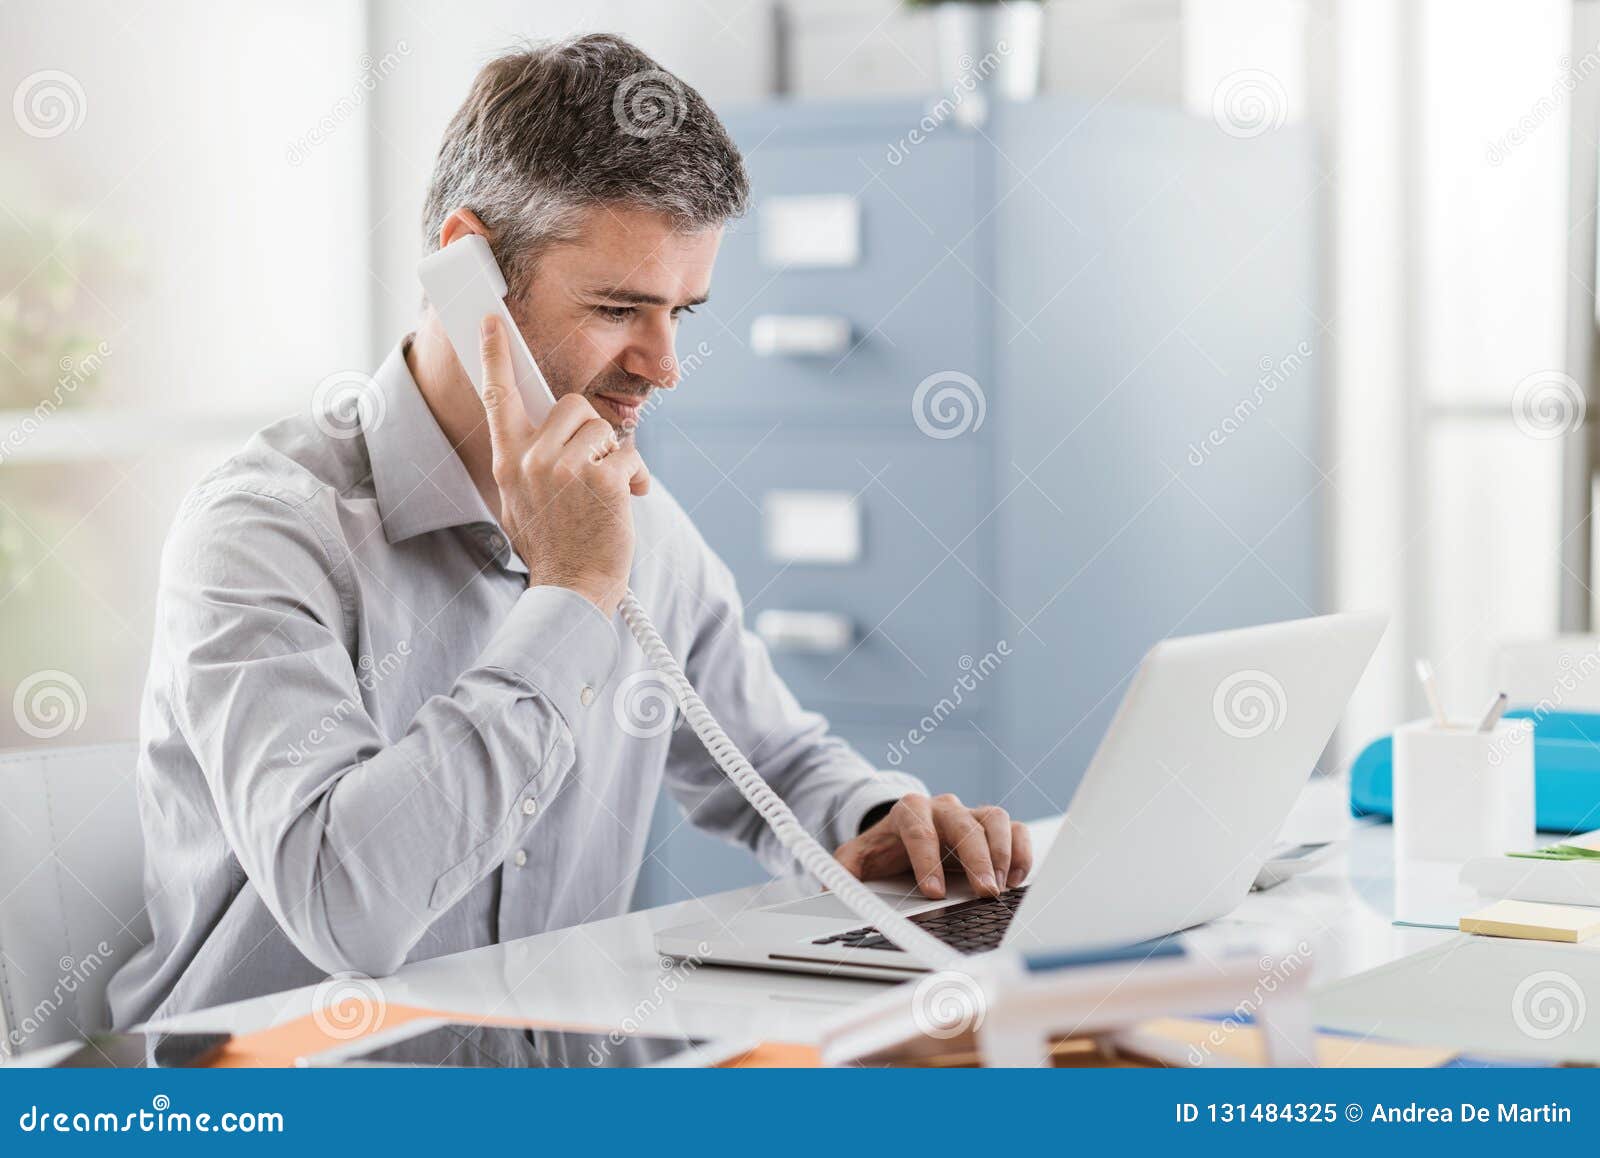 confident smiling businessman and consultant working in his office, he is having a phone call: communication and business concept